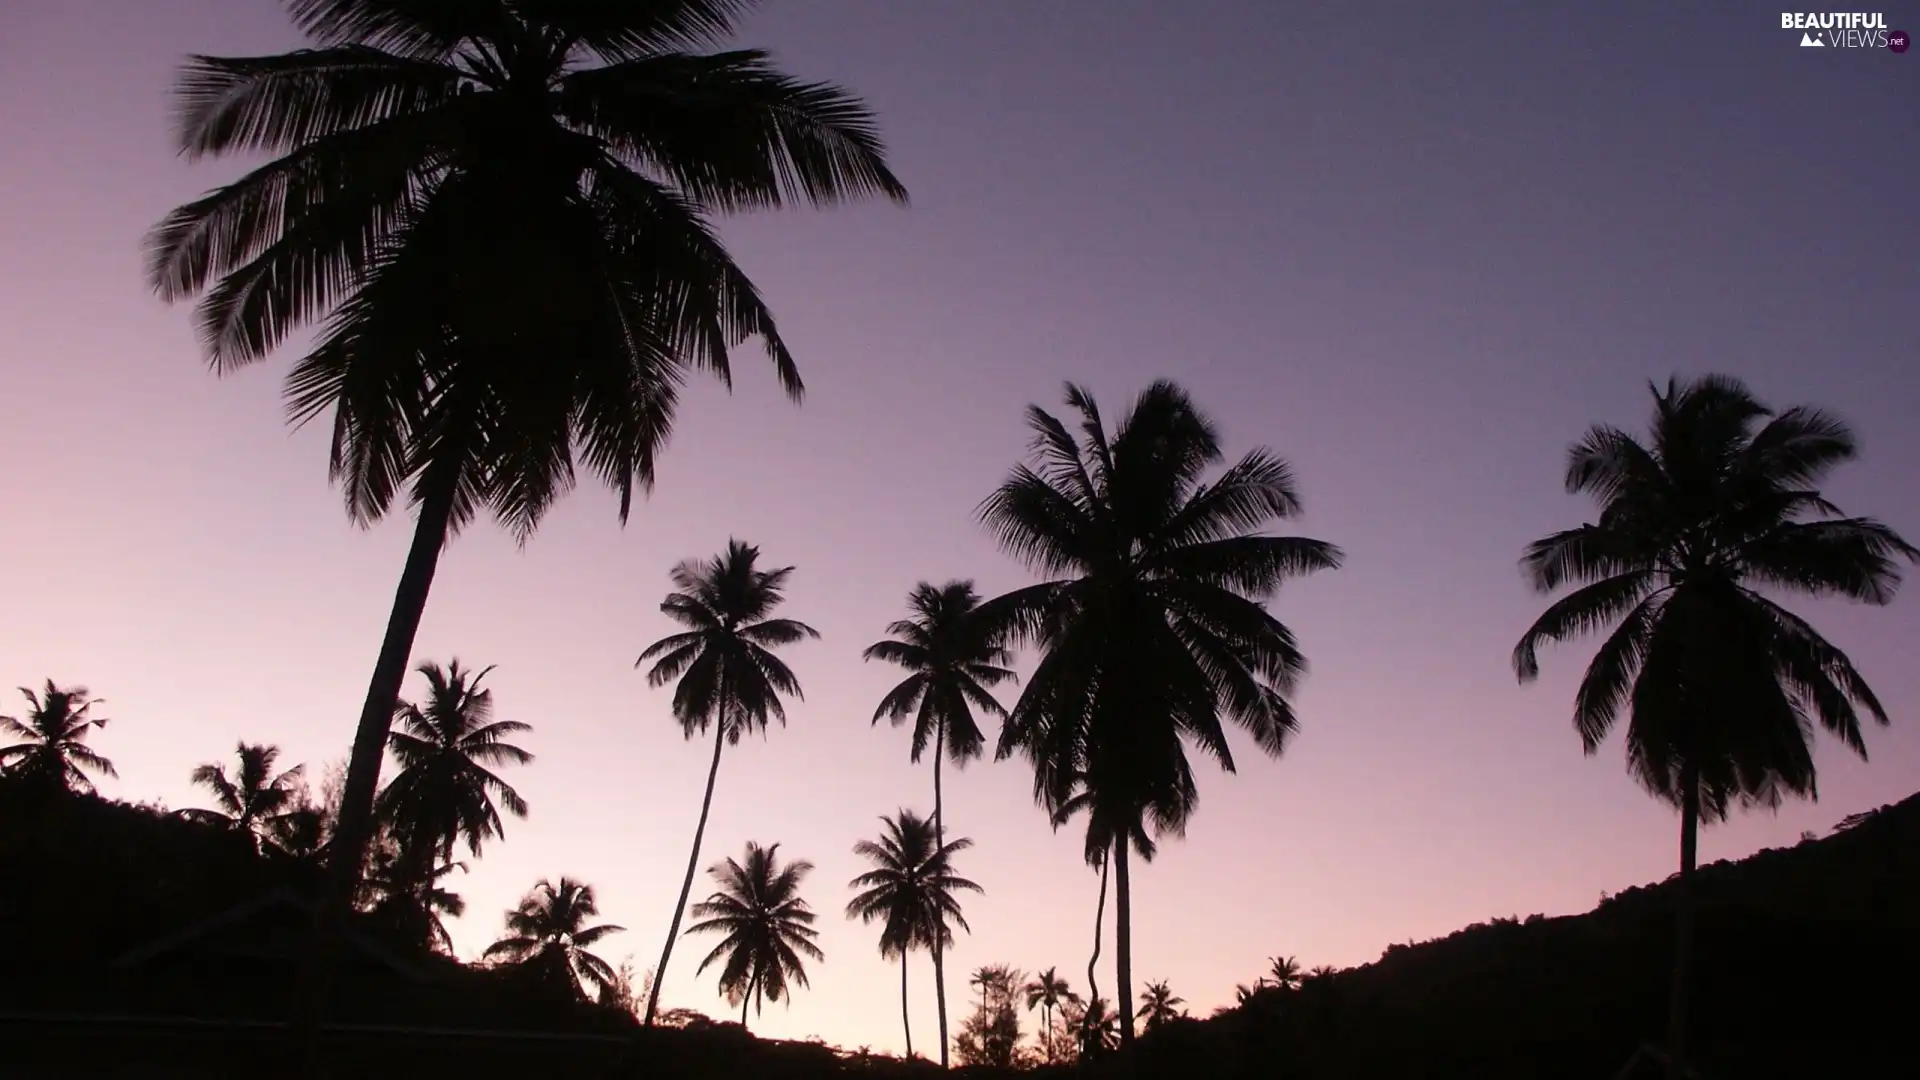 Beaches, trees, viewes, Palms